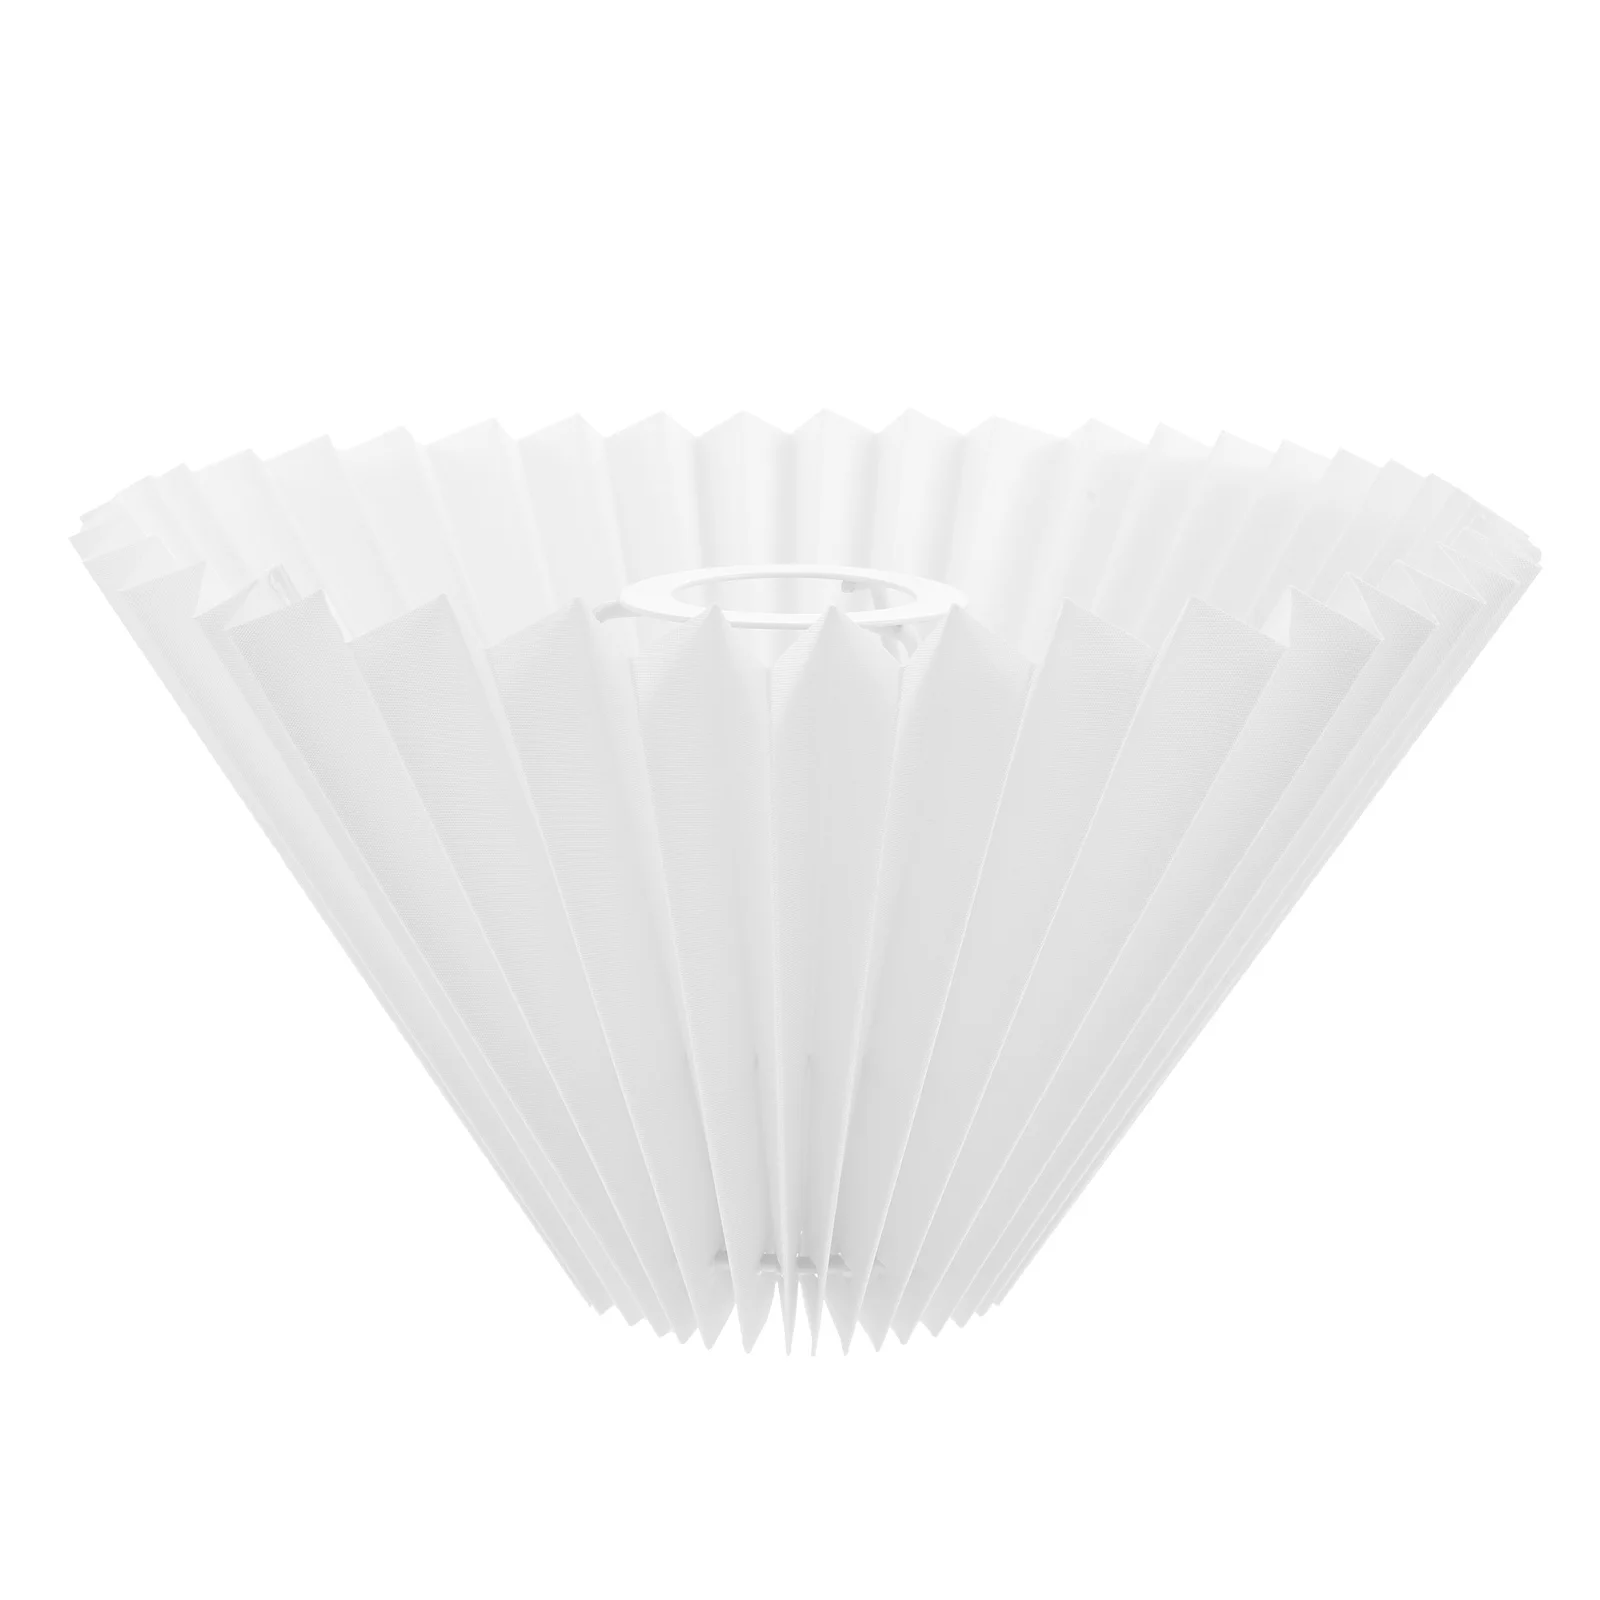 Lampshade Pleated Cloth Light Shade Unique Light Cover Stylish Chandelier Cover Table Lamp Bedside Lamp Cover Accessories